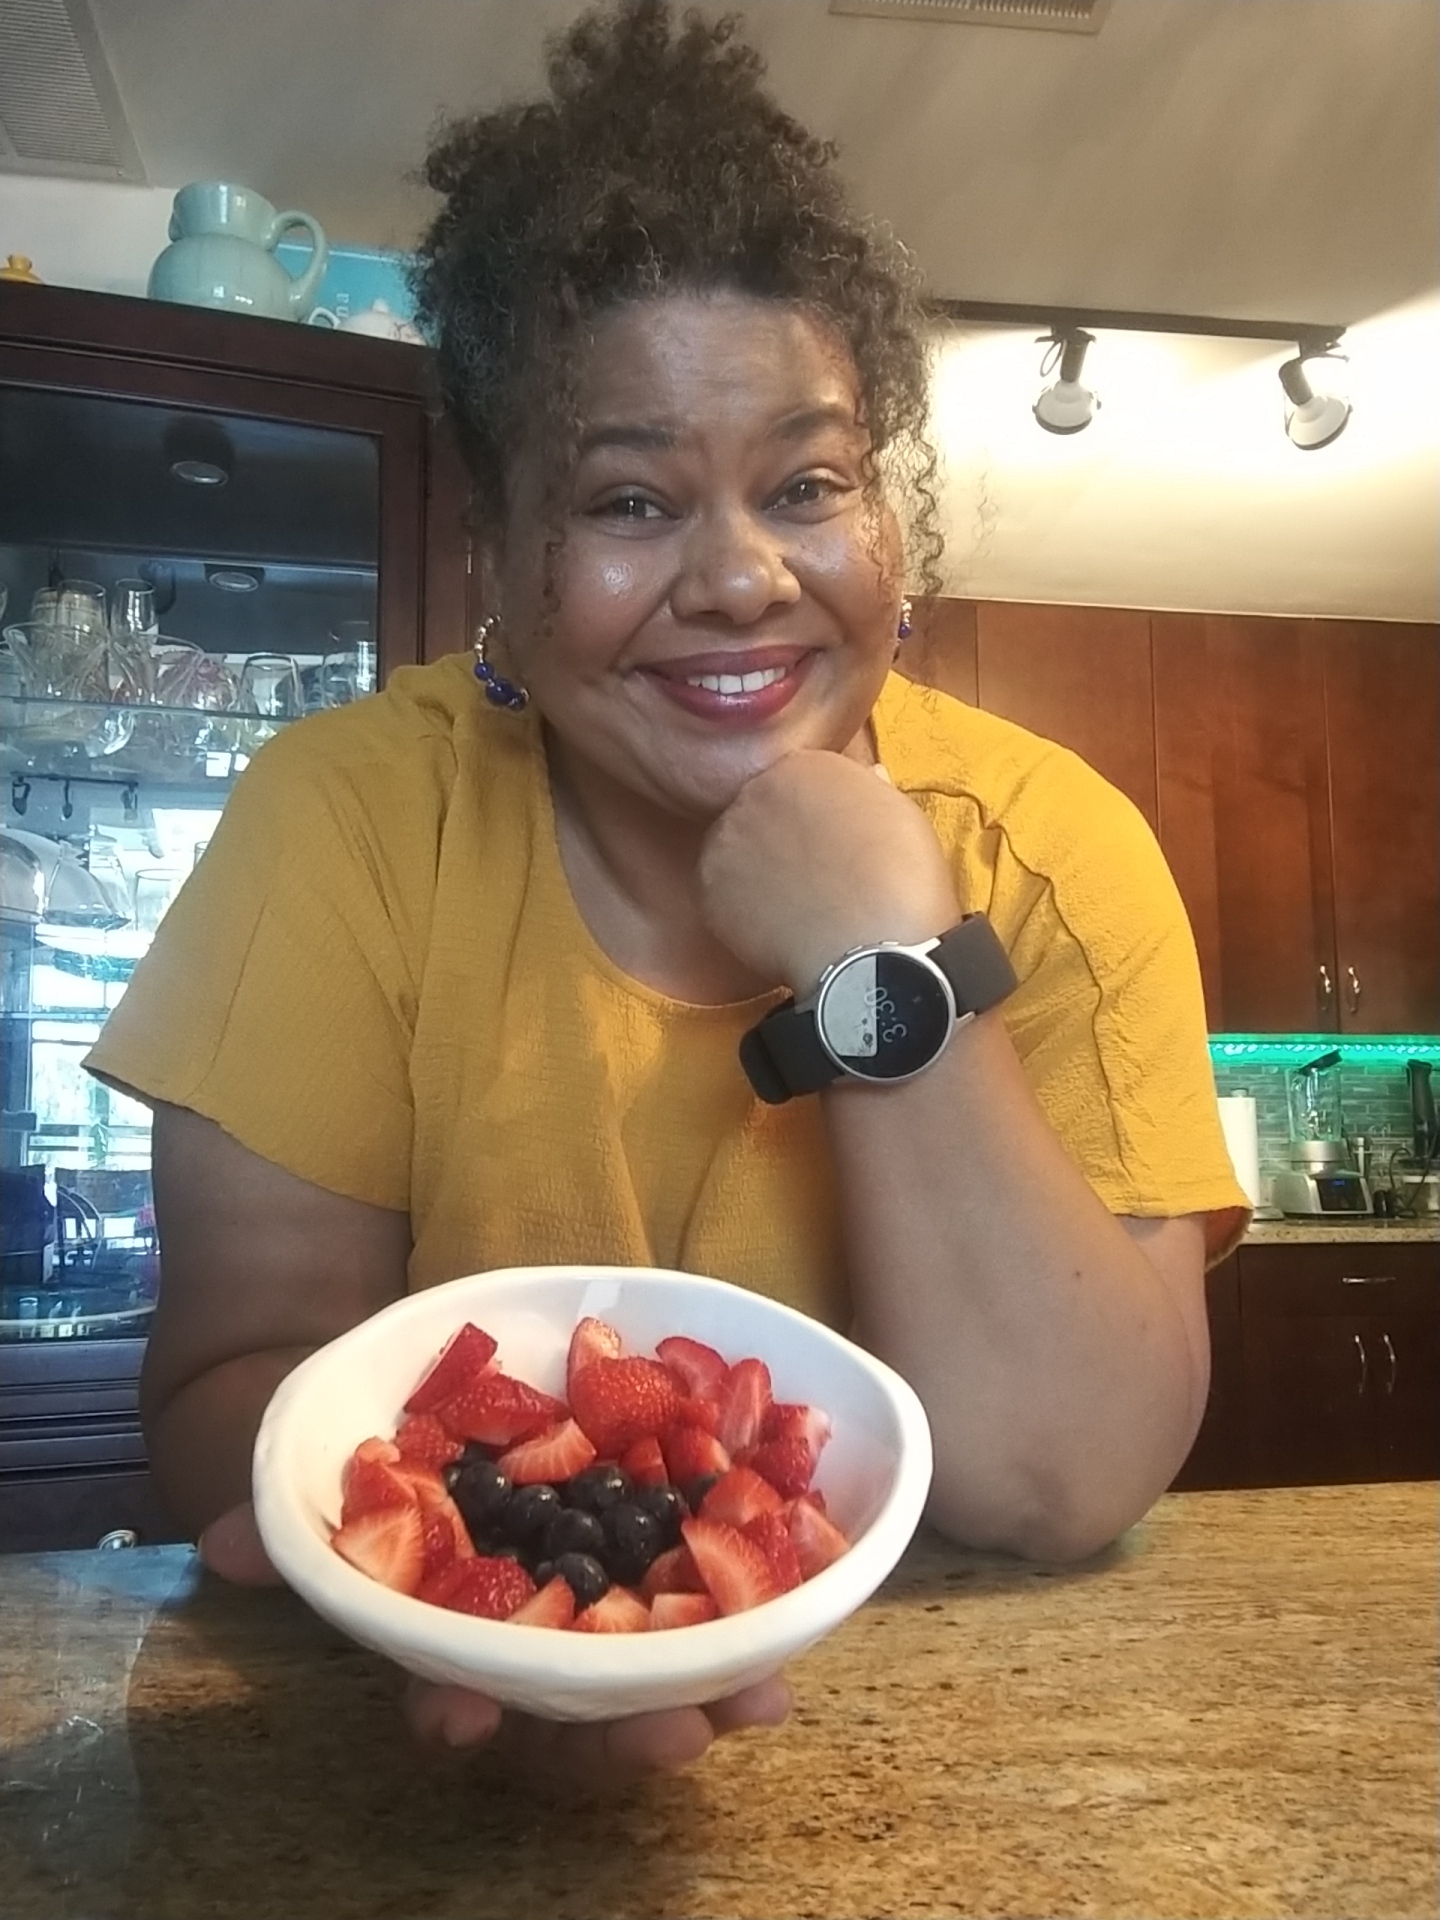 90 Days of Heart Health — What I Learned from my Blood Pressure Monitoring Journey